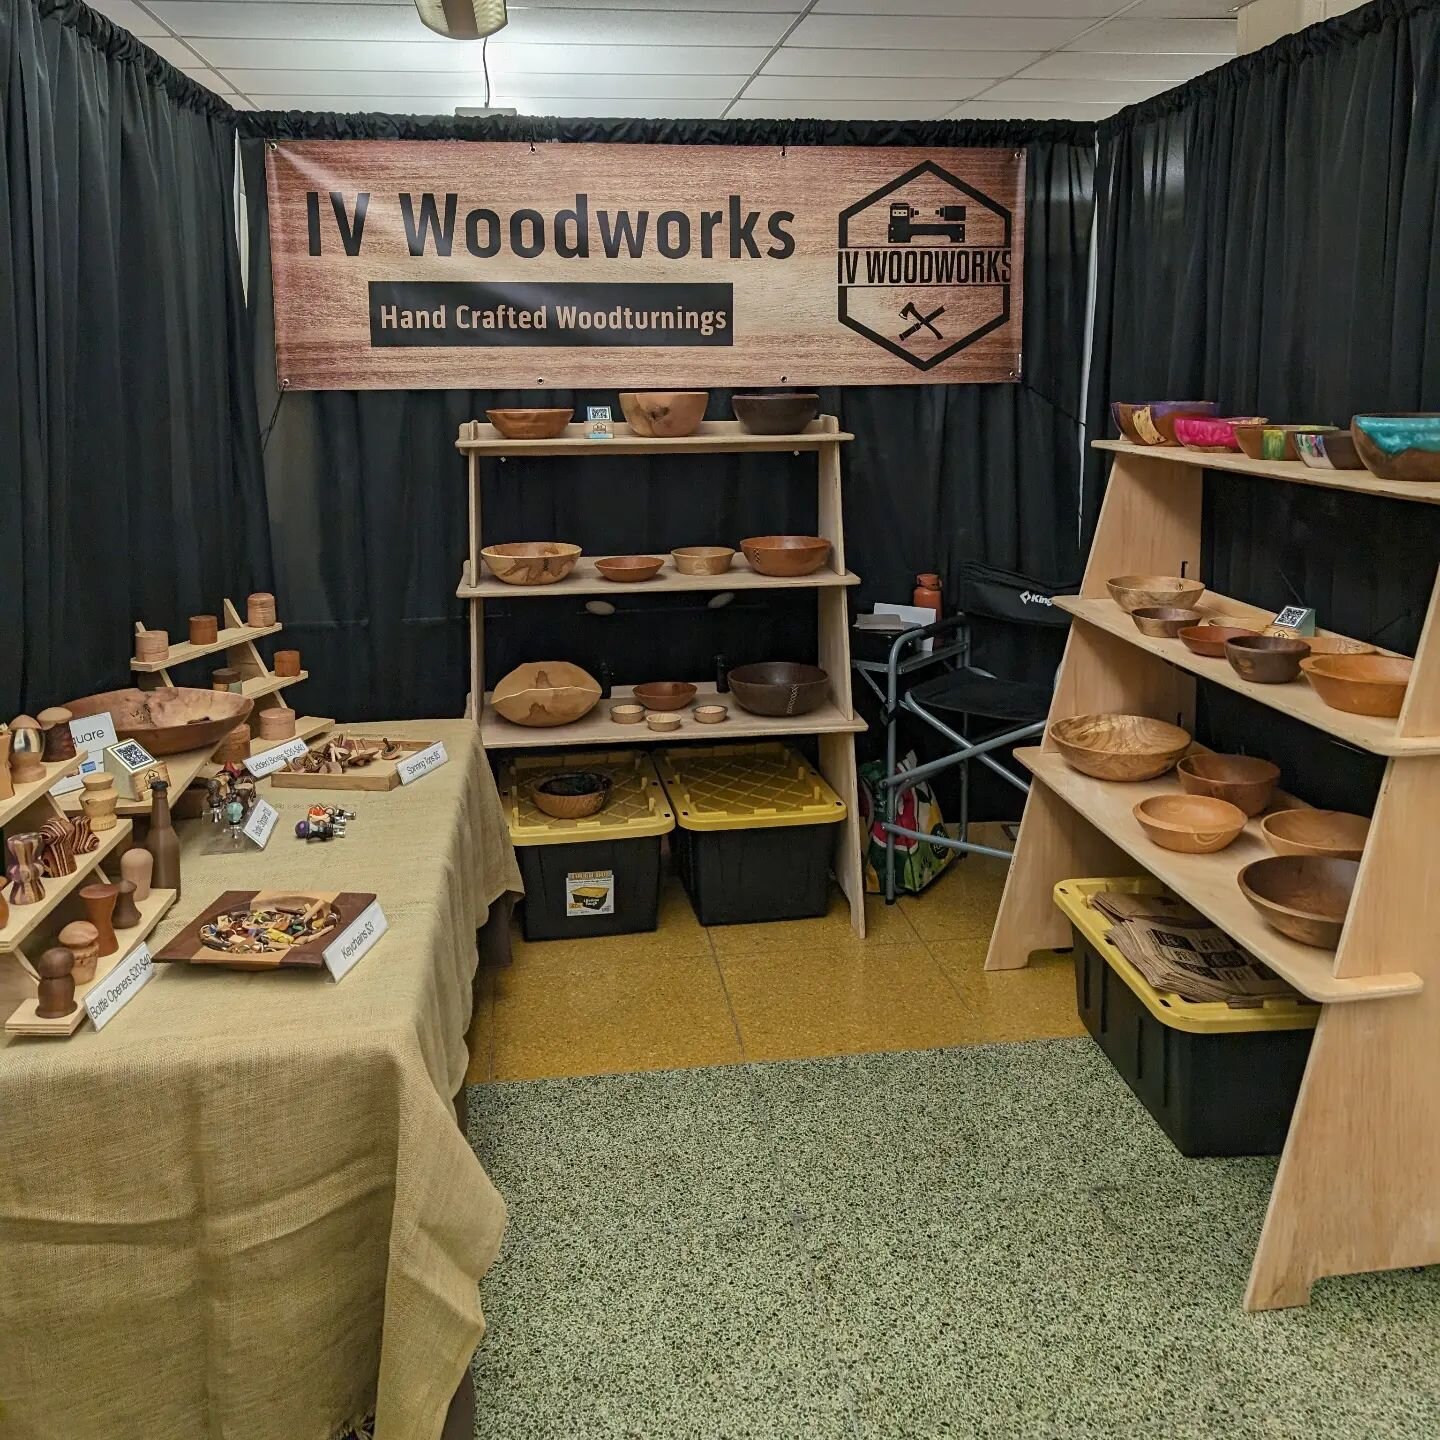 North Penn Holiday Market

Hey everyone. We're all set and doors open at 9:30. Lots of cool stuff and great vendors. 

#woodworking #craftshow